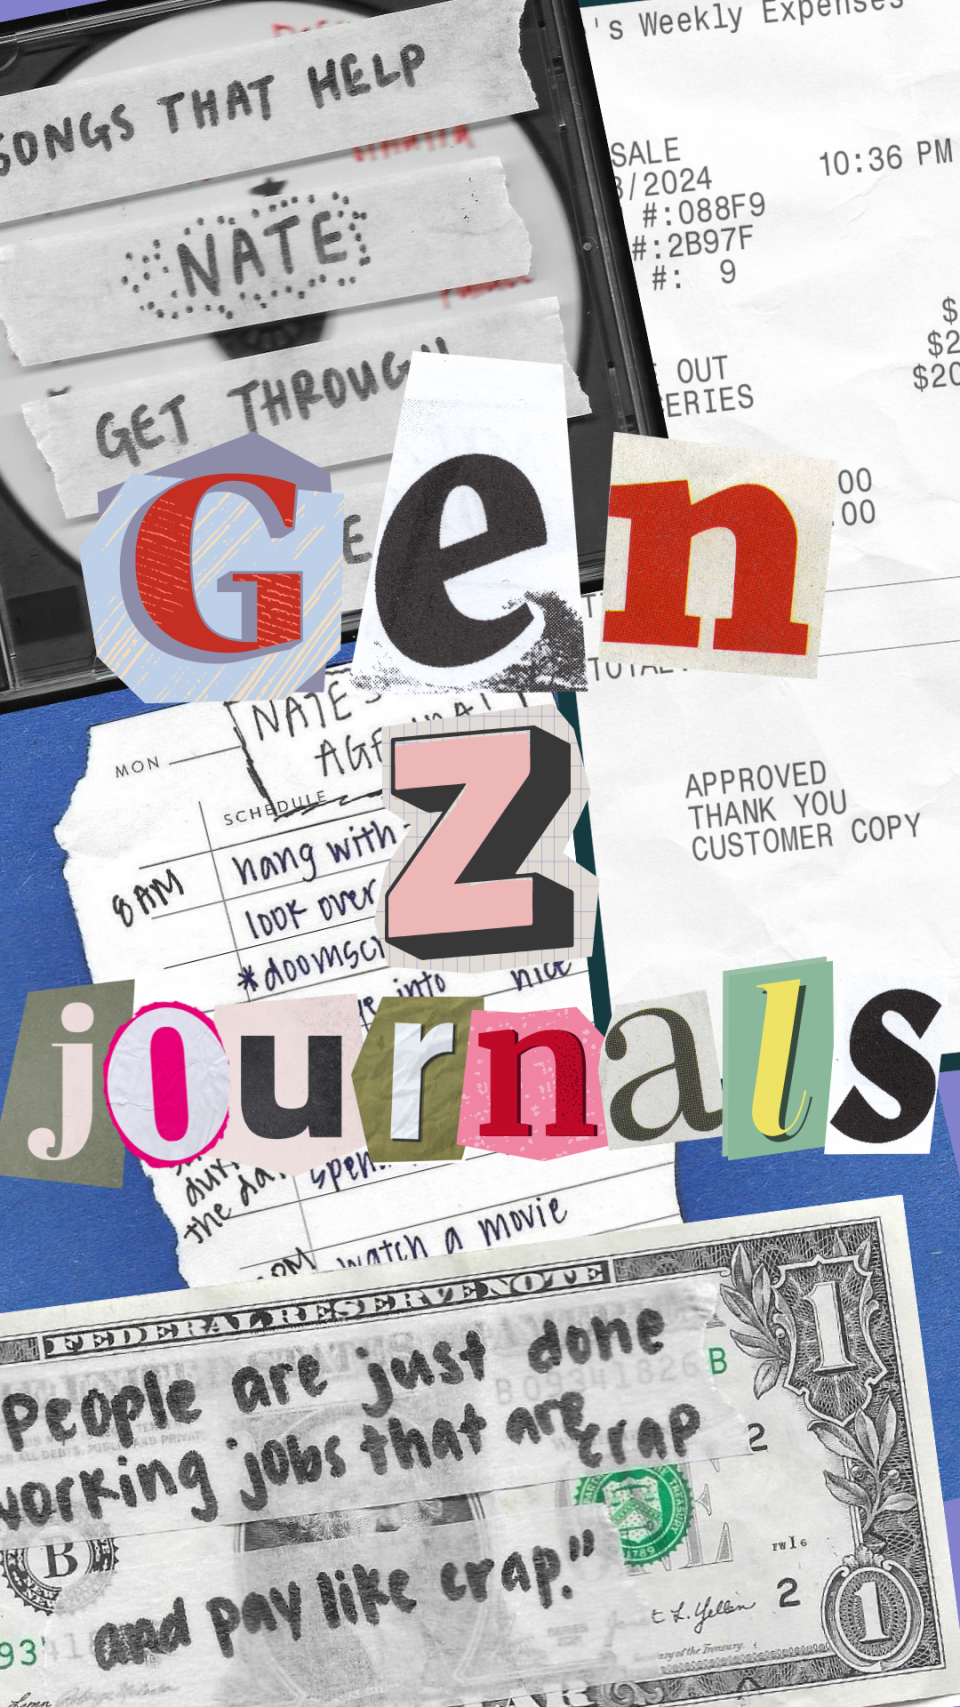 Collage of notes, receipts, and a dollar bill overlaid with "Gen Z Journals" text, symbolizing financial and personal struggles